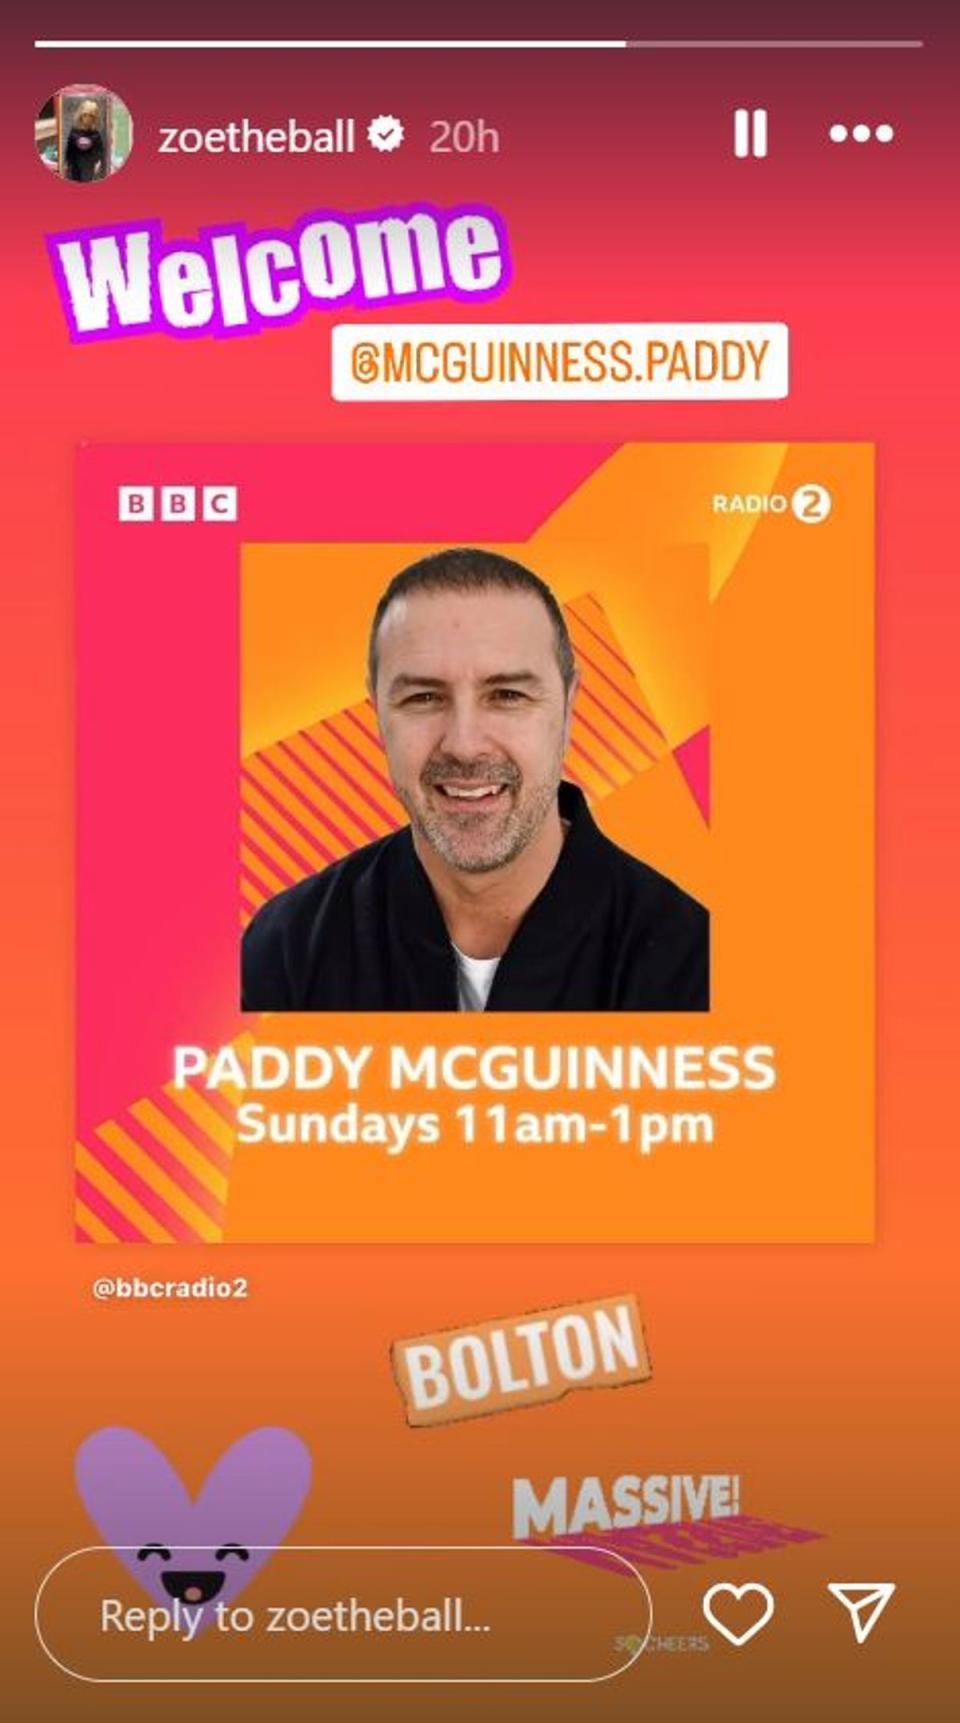 Zoe Ball shared her support for Paddy McGuinness joining BBC Radio 2 on Instagram (Instagram @zoetheball)